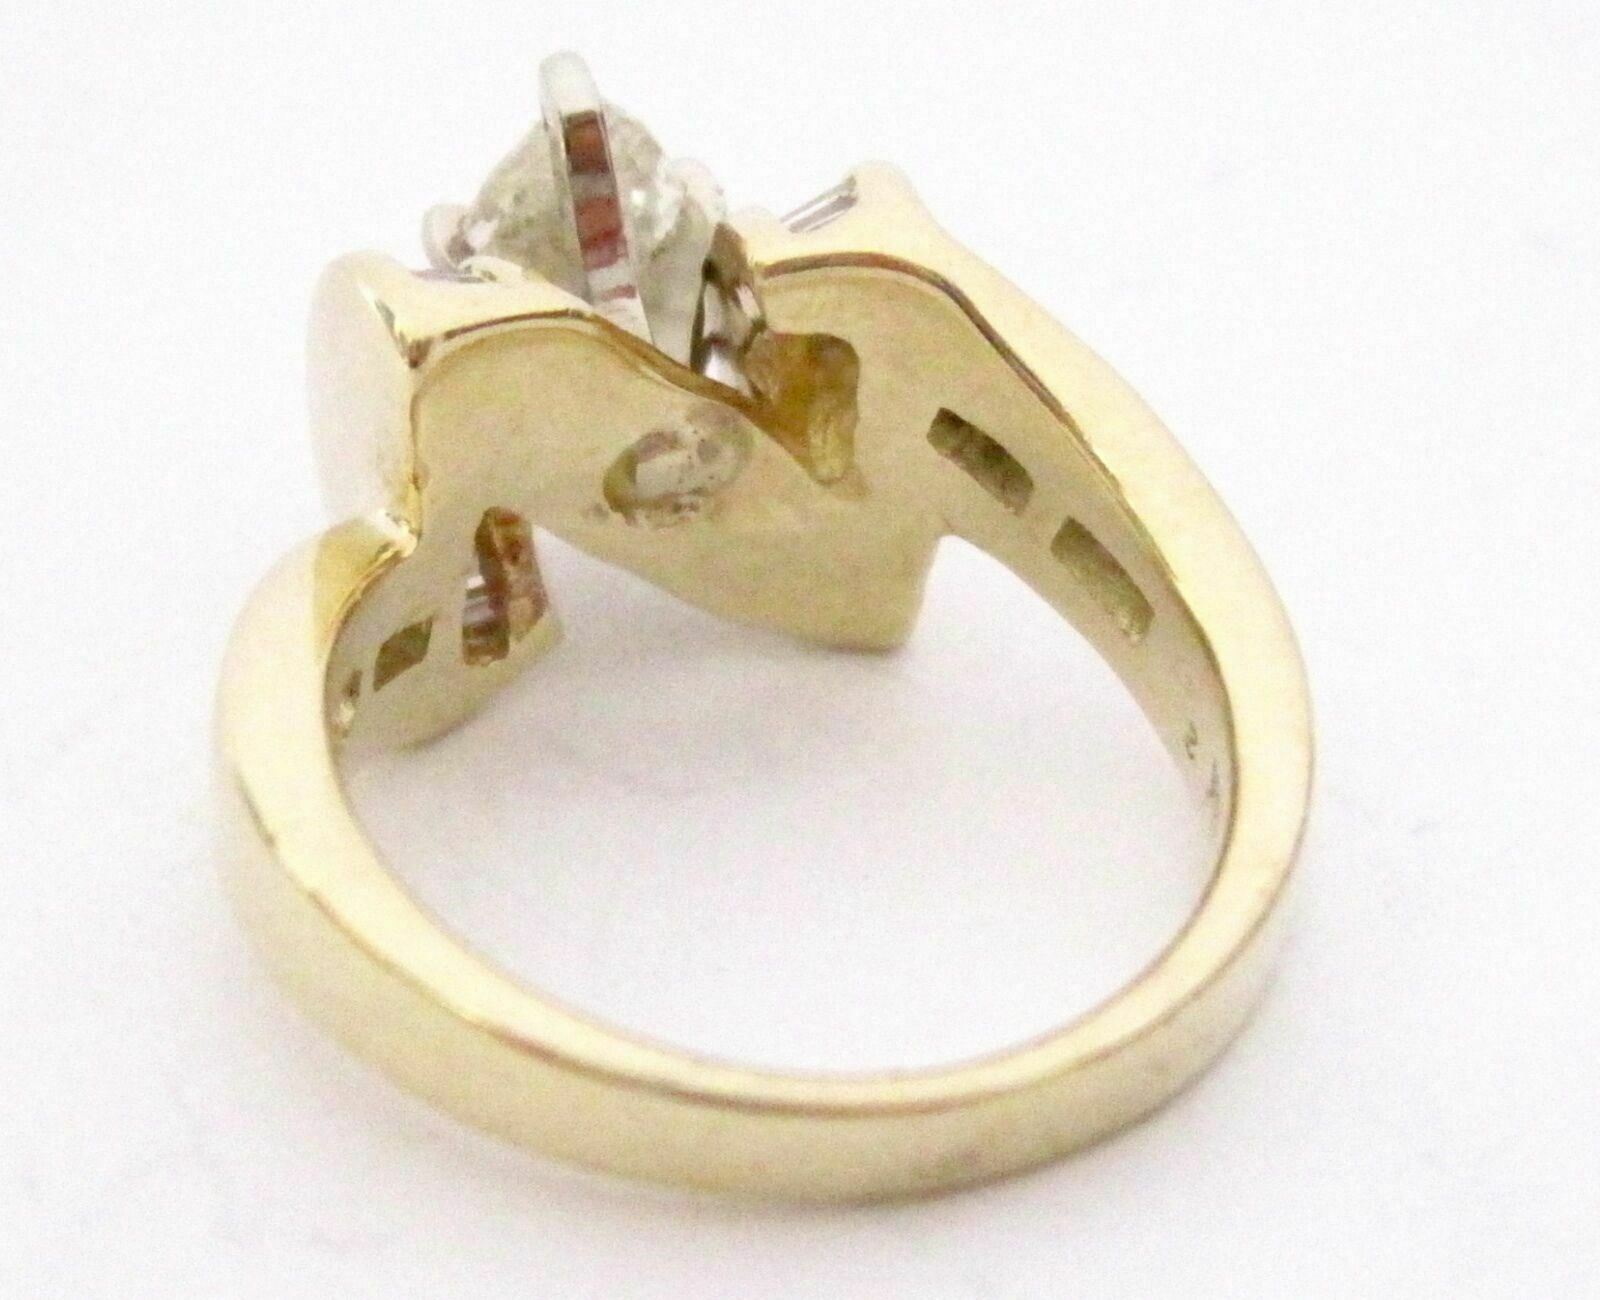 1.59 TCW Marquise & Baguette Diamonds Solitaire Ring Size 6.5 H SI3 14k Yel Gold